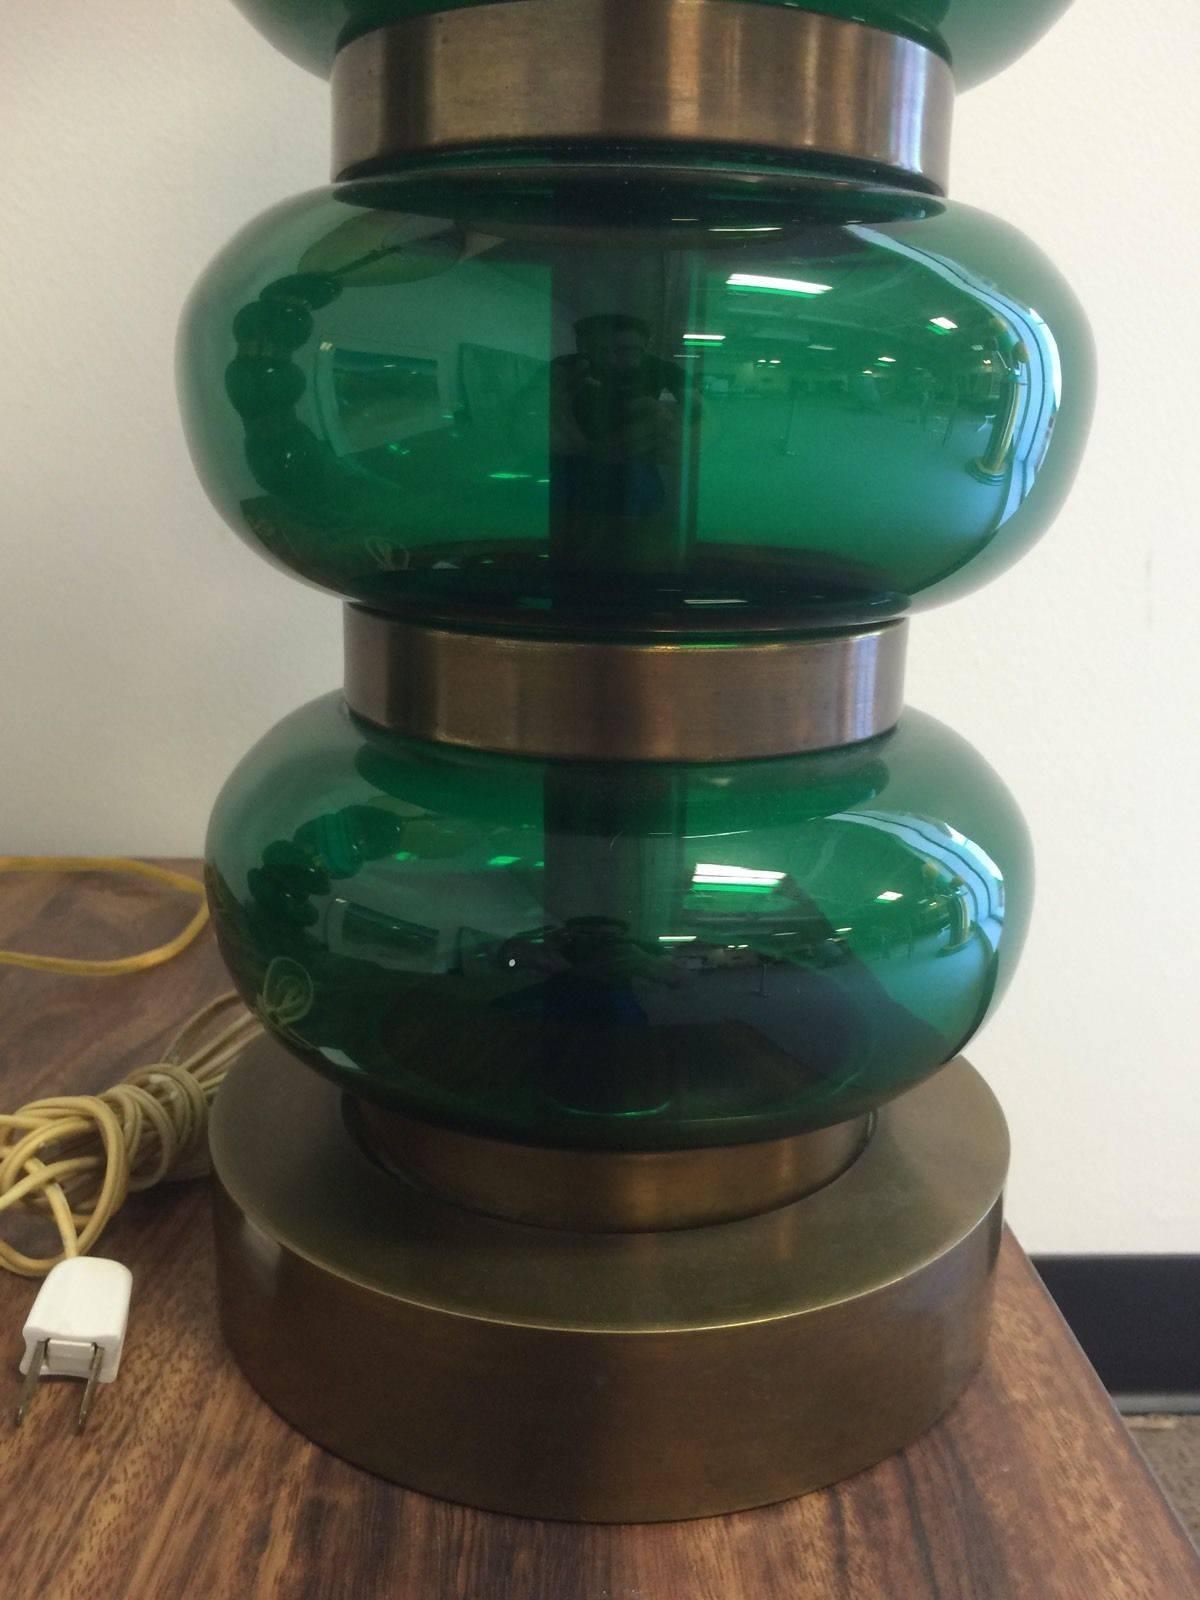 Amazing Pair of Paul Hanson Brass and Green Glass orb lamps. These lamps really make a statement.